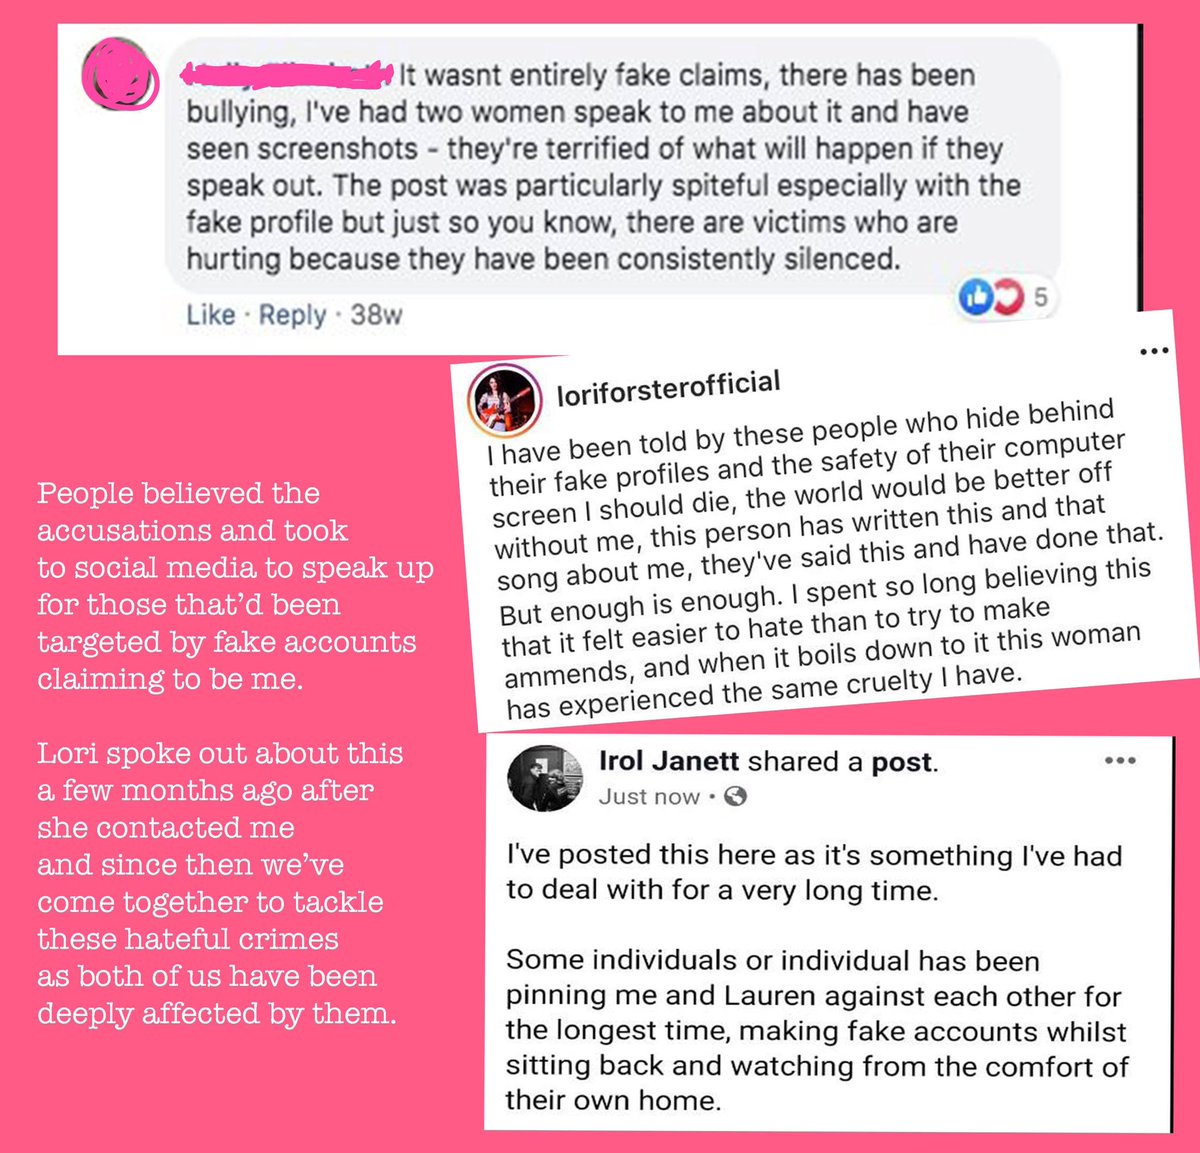 Then here are the 2 girls who were targeted by the accounts posed as me who went through hell because of it. We are now all friends and have been working together to stop this hate campaign once and for all.  #EnoughIsEnough  #bullying  #fake  #abuse  #lies  #accusations